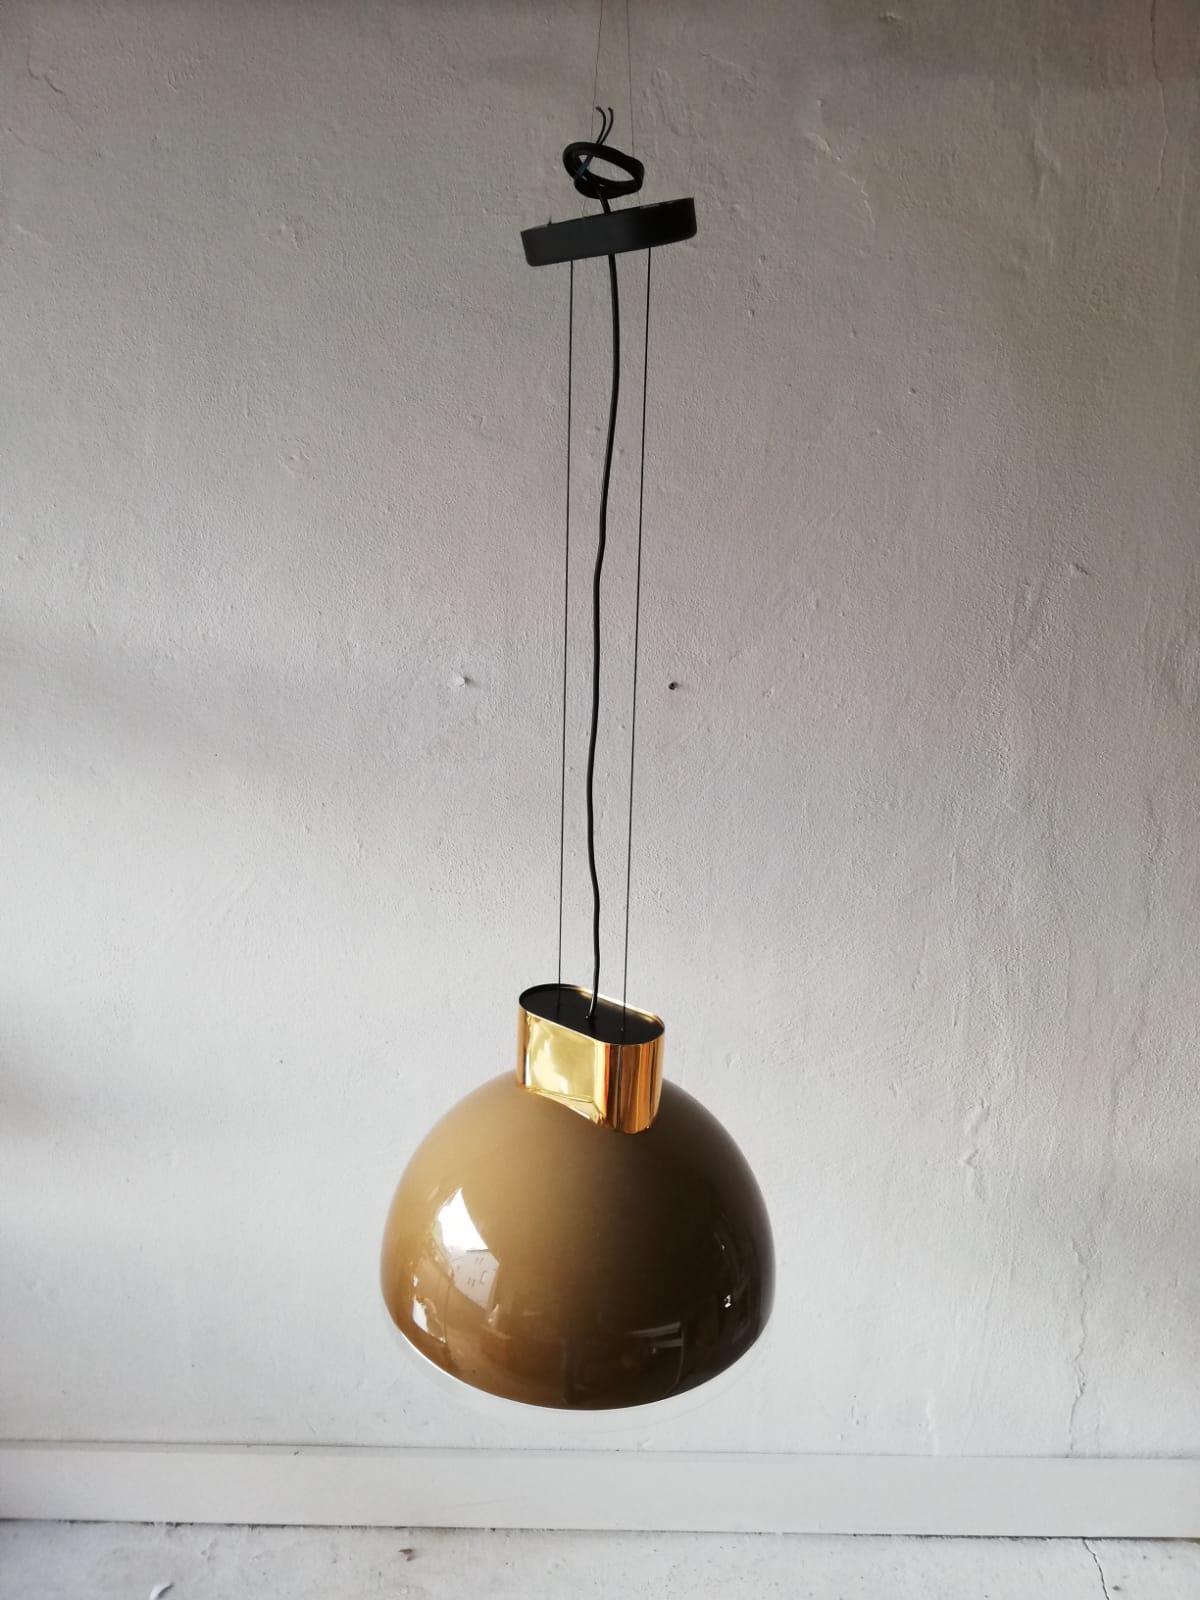 Metal Caramel Round Glass Pendant Lamp by Staff, 1980s Germany For Sale